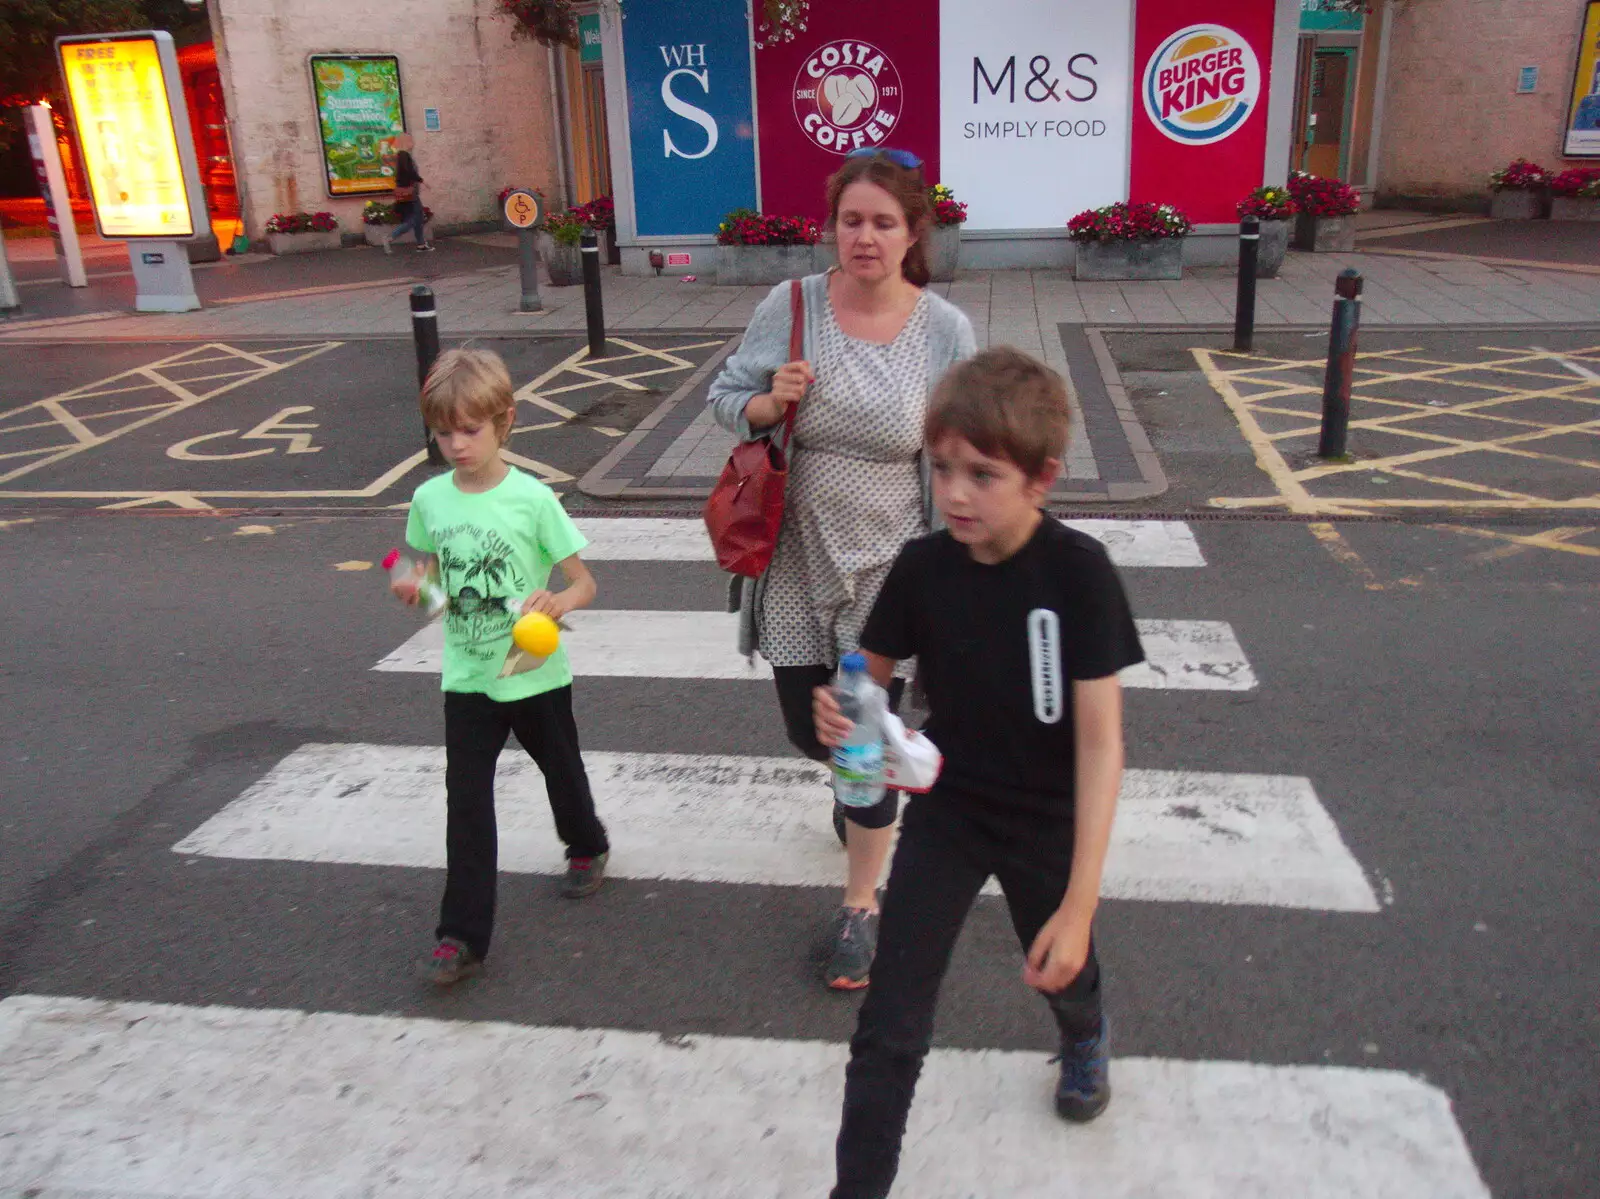 Abbey Road outside Stafford Services, from The Summer Trip to Ireland, Monkstown, Co. Dublin, Ireland - 9th August 2019